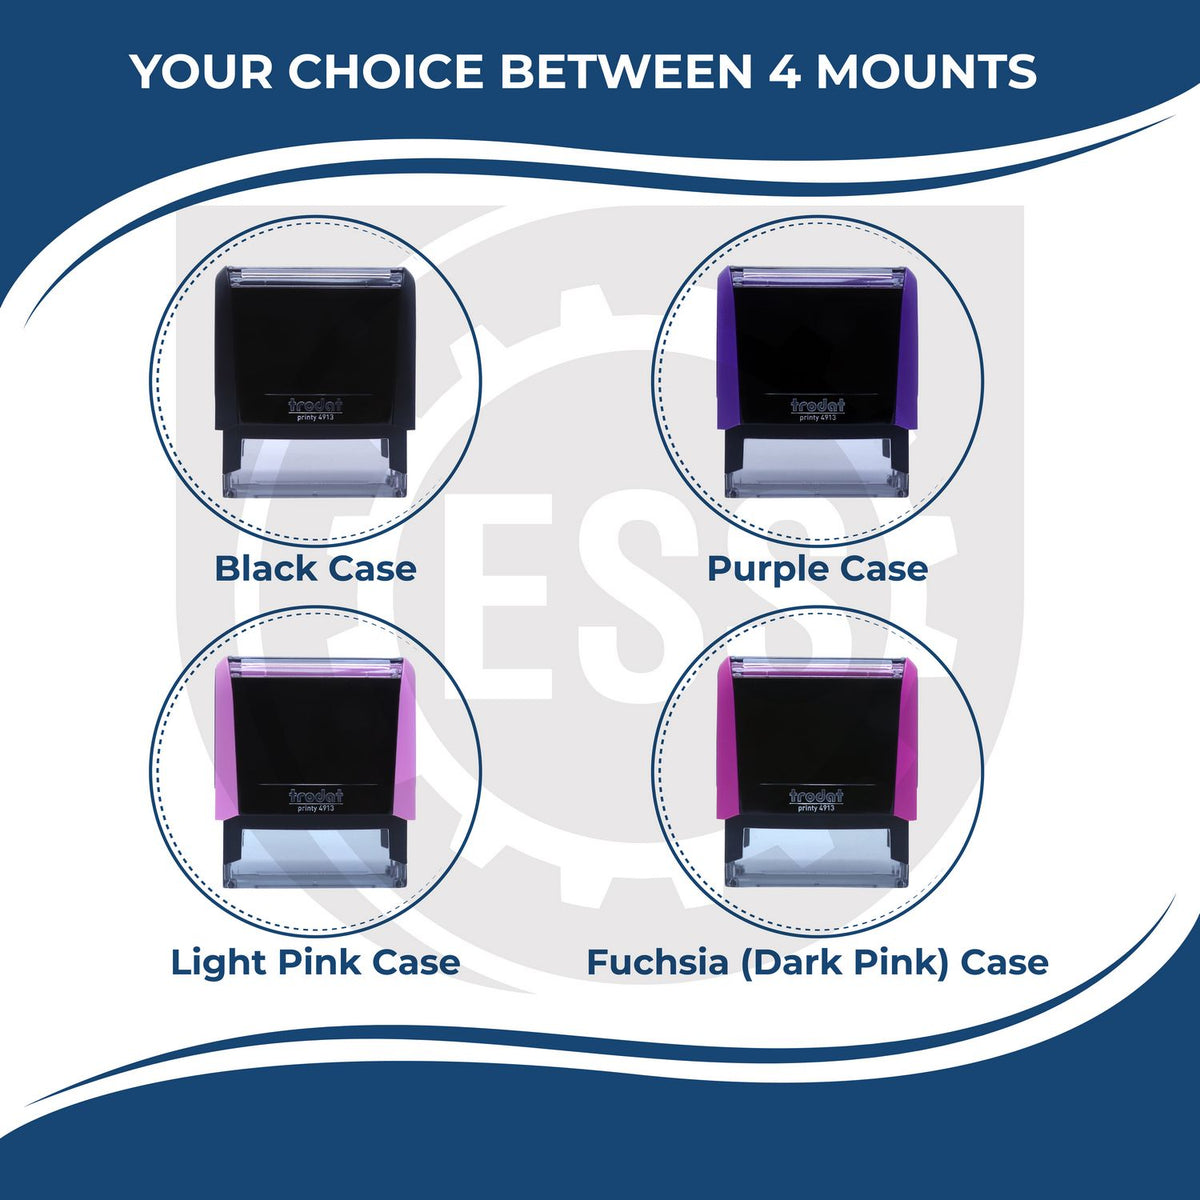 A picture of different colored mounts for the Self-Inking Rectangular Illinois Notary Stamp featurning a Red, Blue or Black Mount